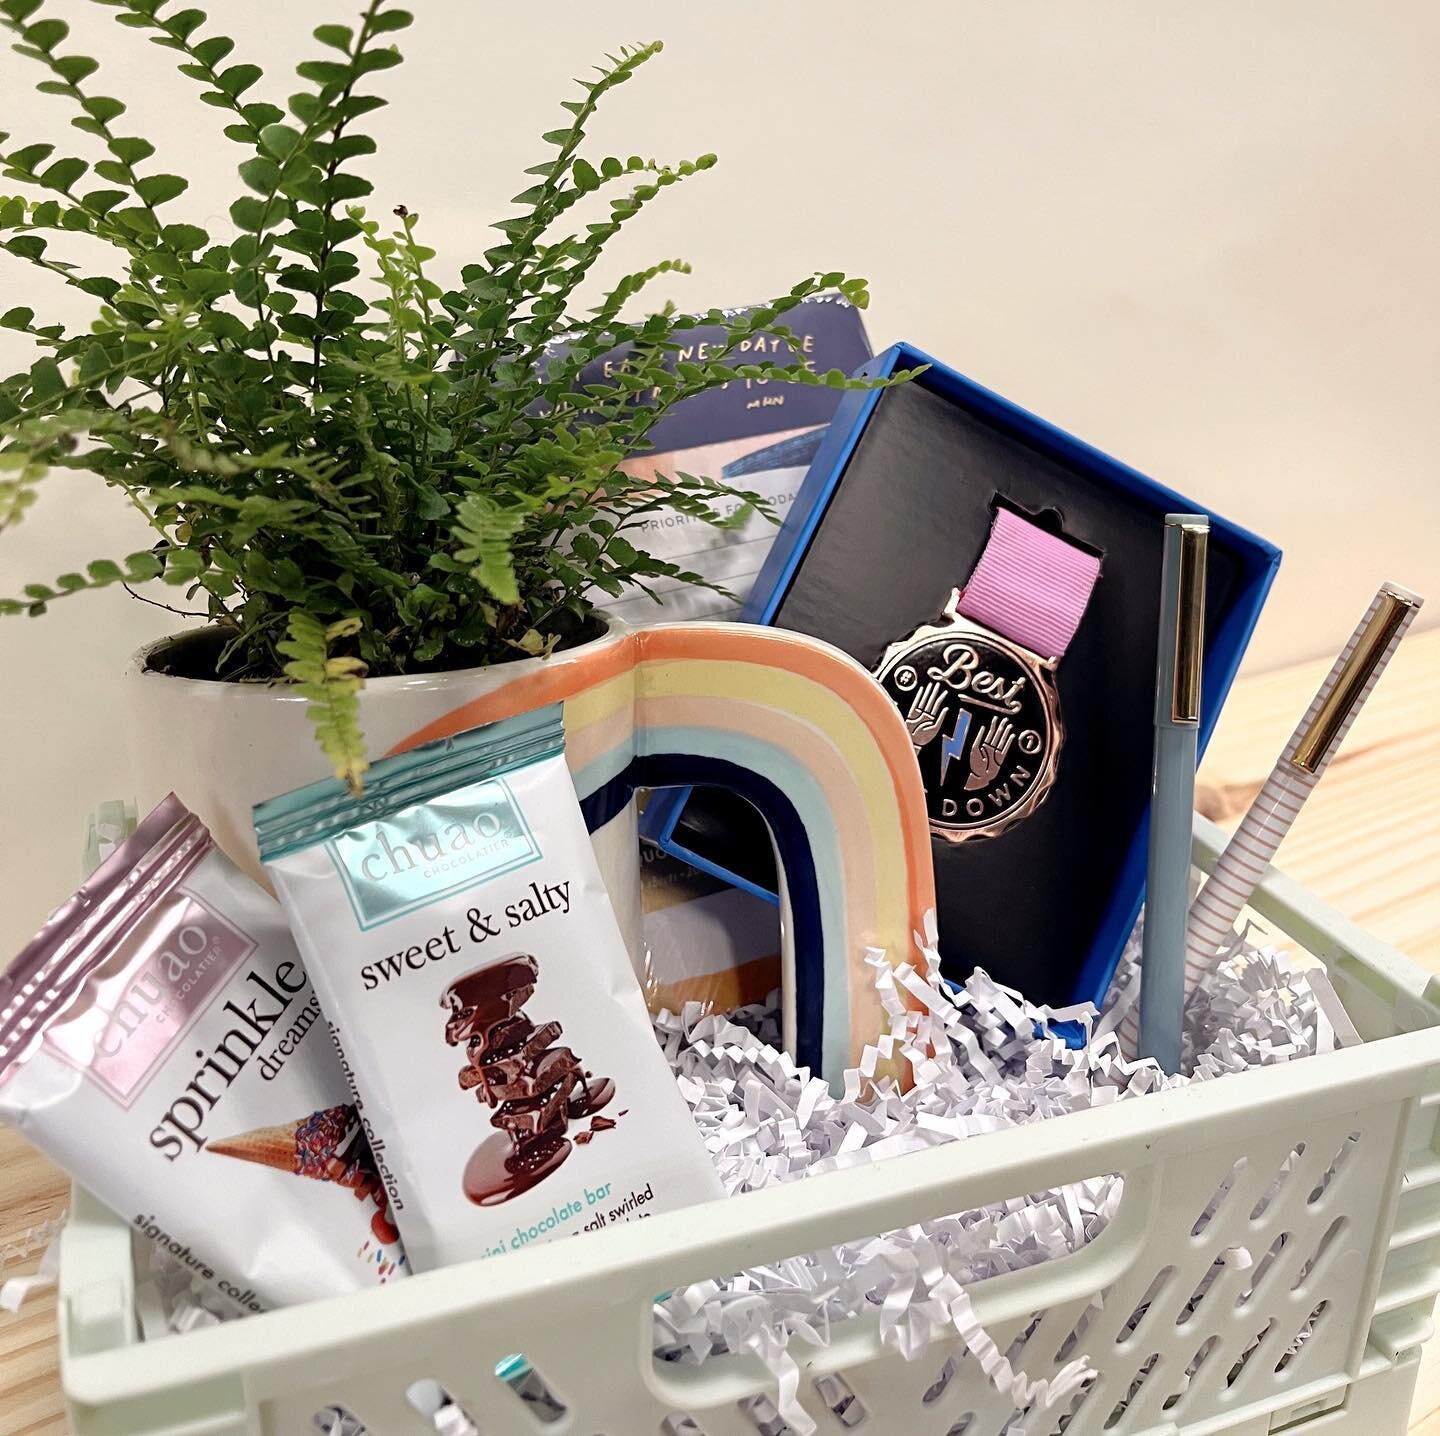 Administrative professionals day is one week away and we got you covered! Tell the person who keeps you sane how much you appreciate them😘

#admin #adminday #giftgiving #seattle